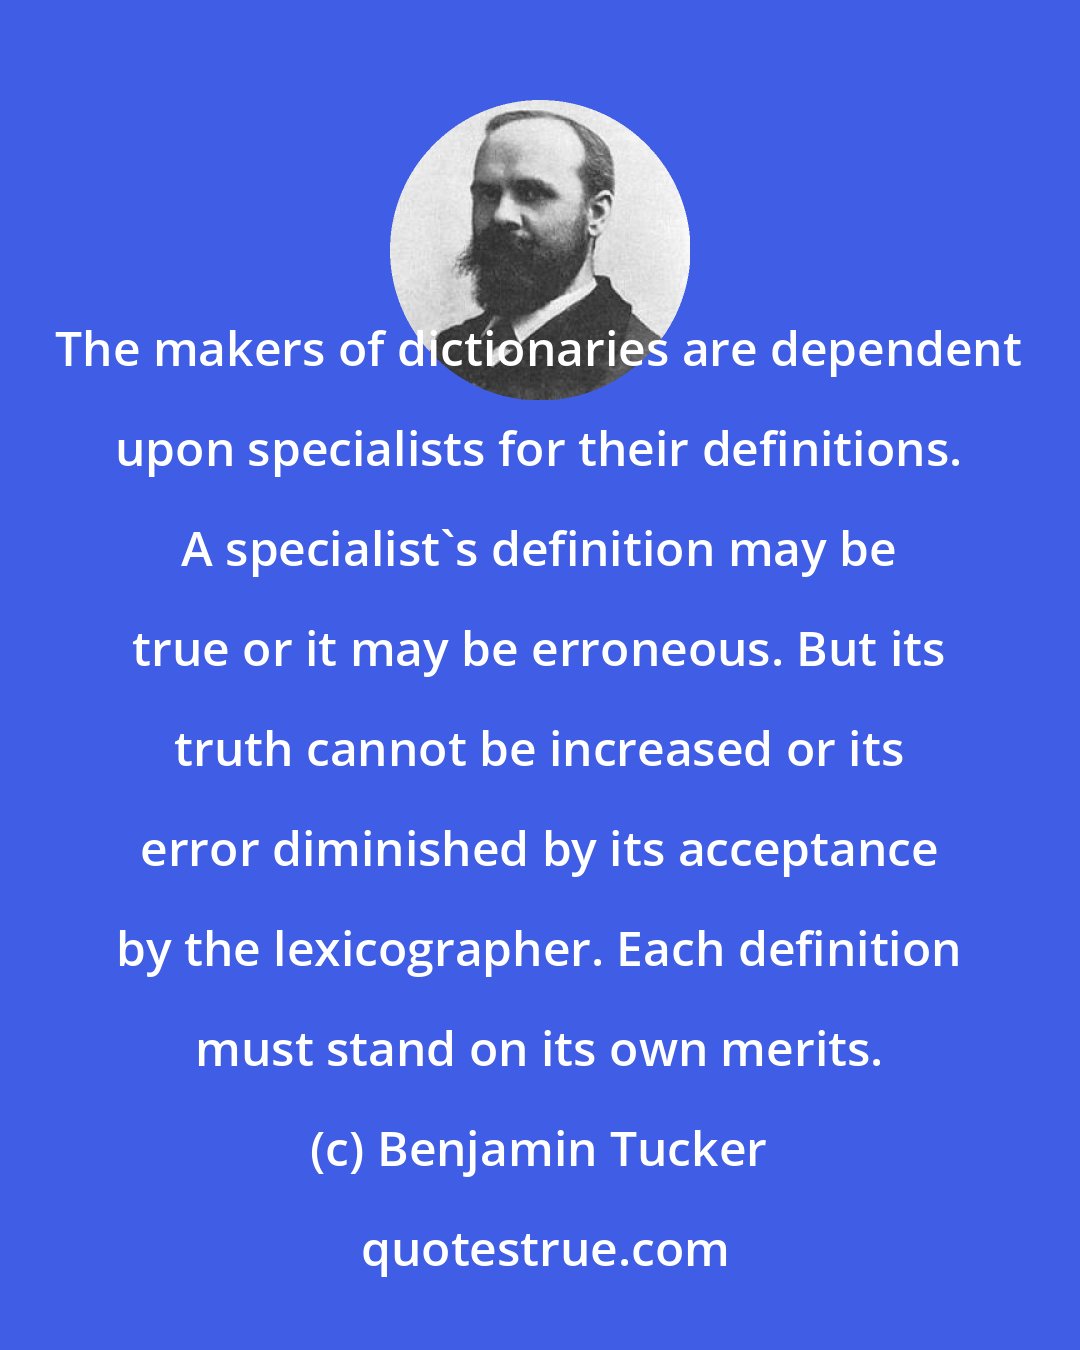 Benjamin Tucker: The makers of dictionaries are dependent upon specialists for their definitions. A specialist's definition may be true or it may be erroneous. But its truth cannot be increased or its error diminished by its acceptance by the lexicographer. Each definition must stand on its own merits.